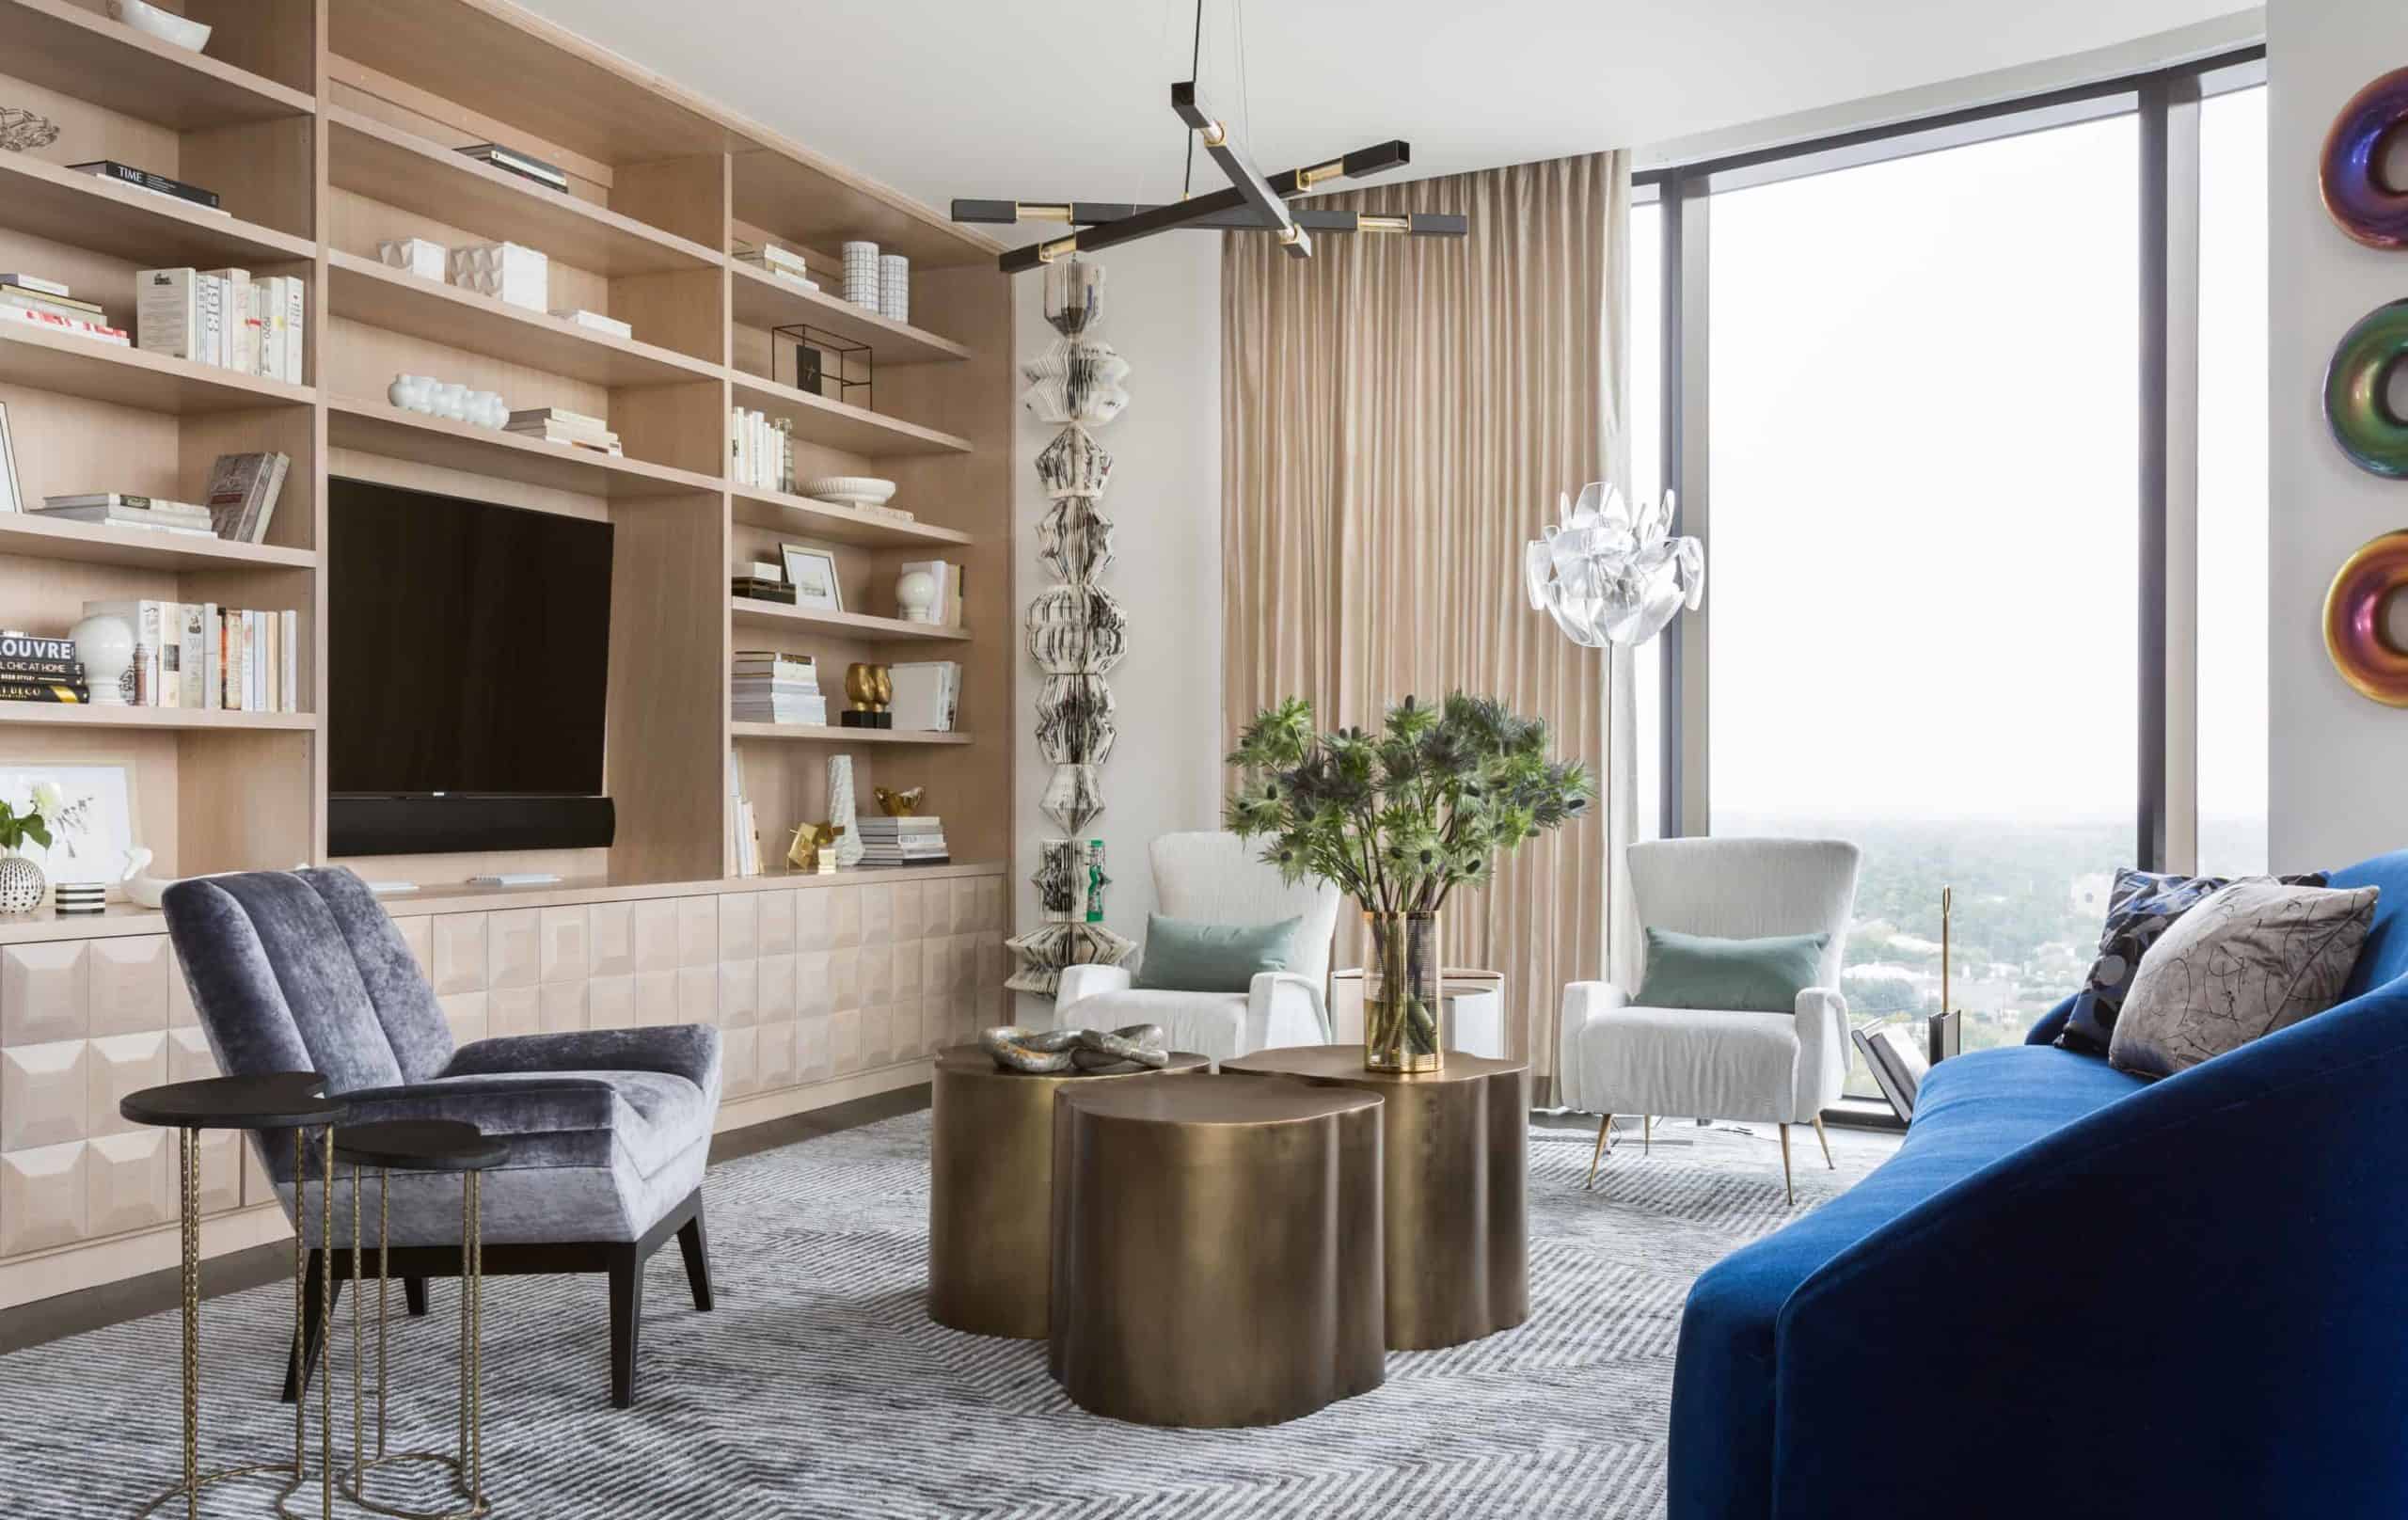 City Living in this Glam Houston High-rise